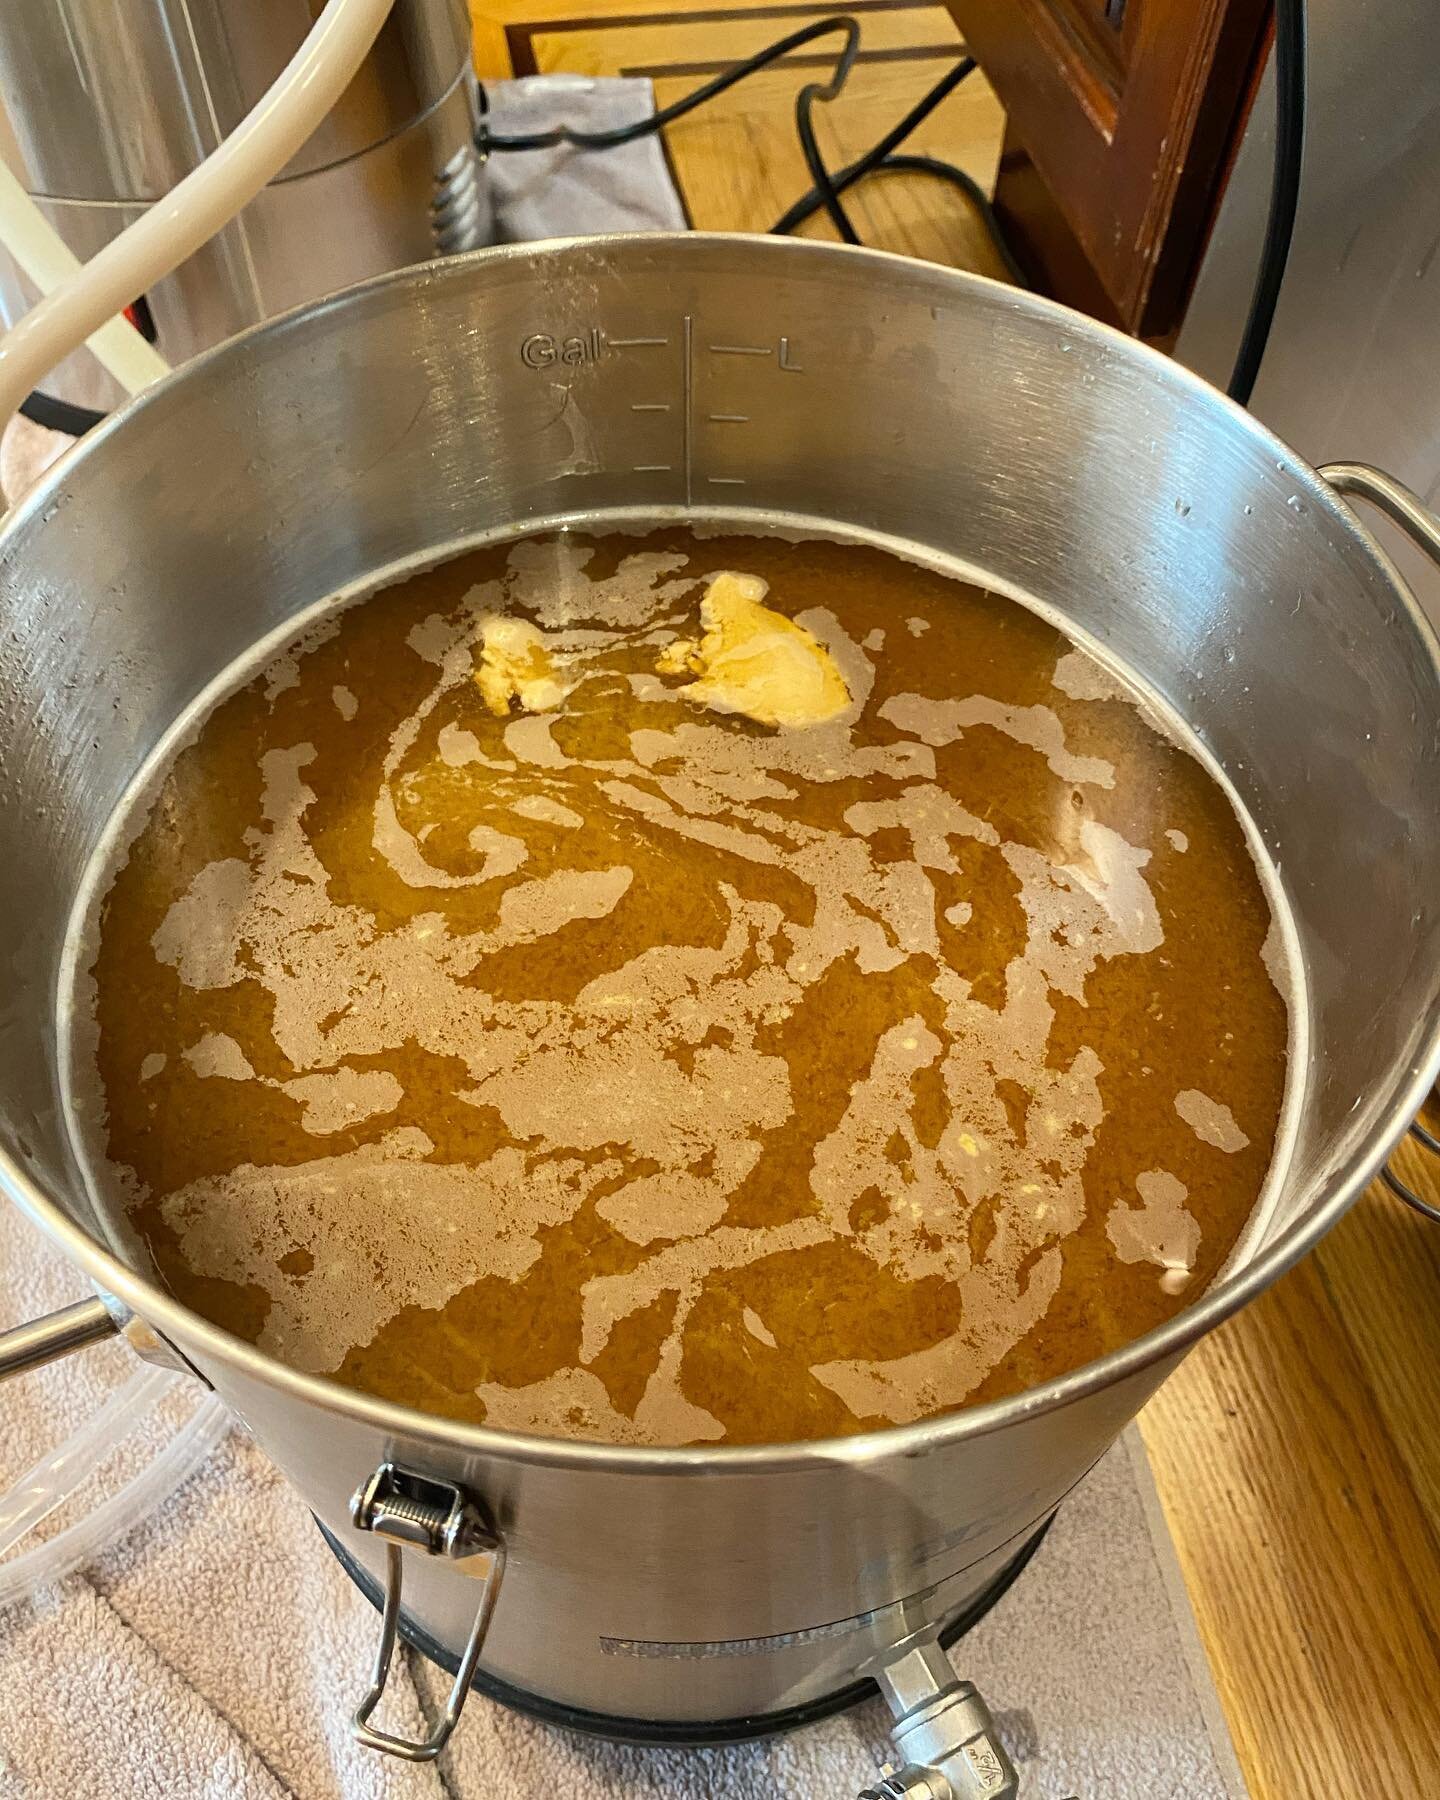 3 gallons of festbier with lutra! 65% floor malted pilsner, 35% vienna. i&rsquo;ve made this recipe many times before with @bootlegbiology oslo, can&rsquo;t wait to try it with @omegayeast lutra. fermenting at 78, let&rsquo;s see how fast and clean w